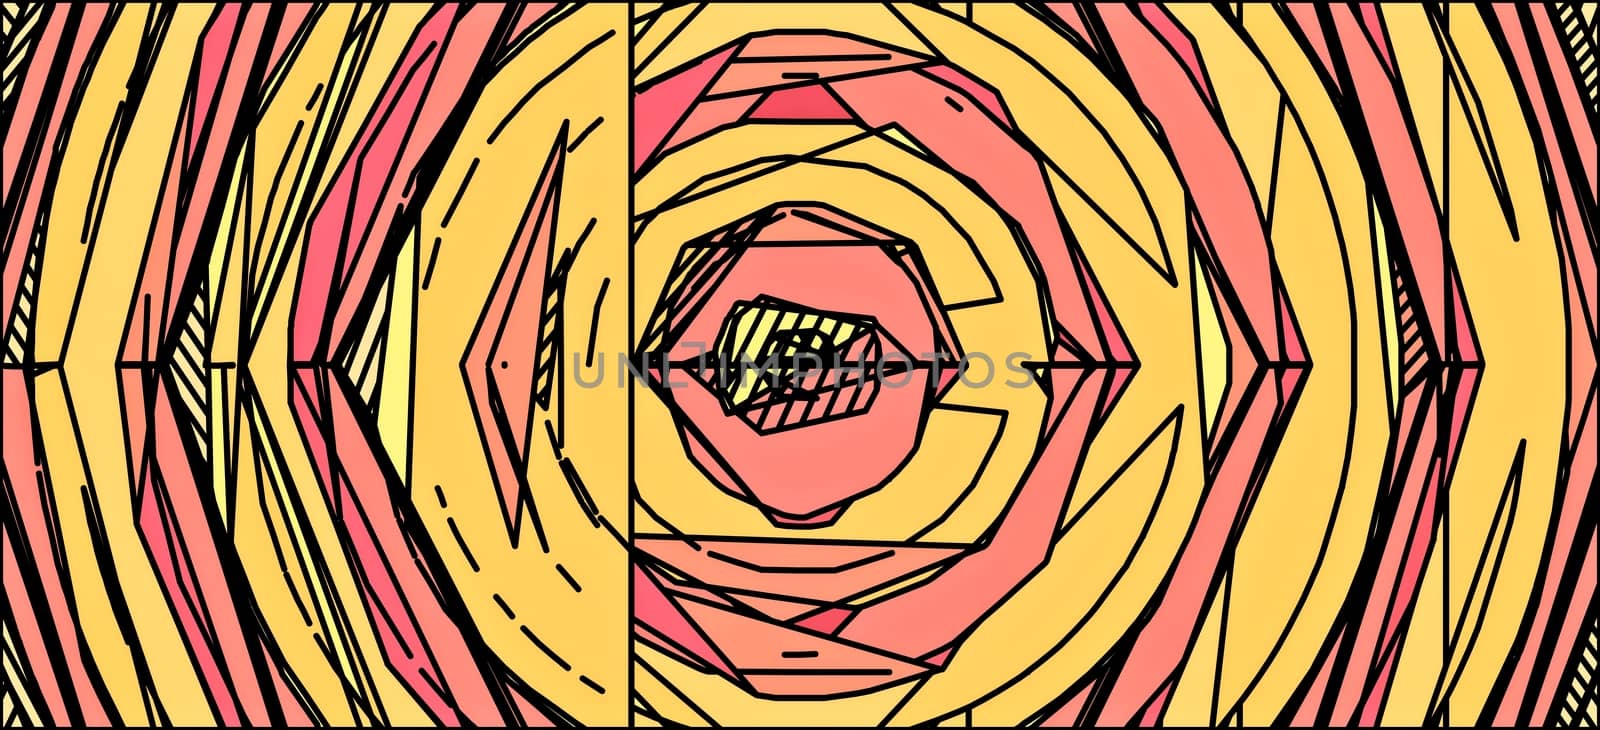 drawing abstract background with pink and yellow color by Timmi